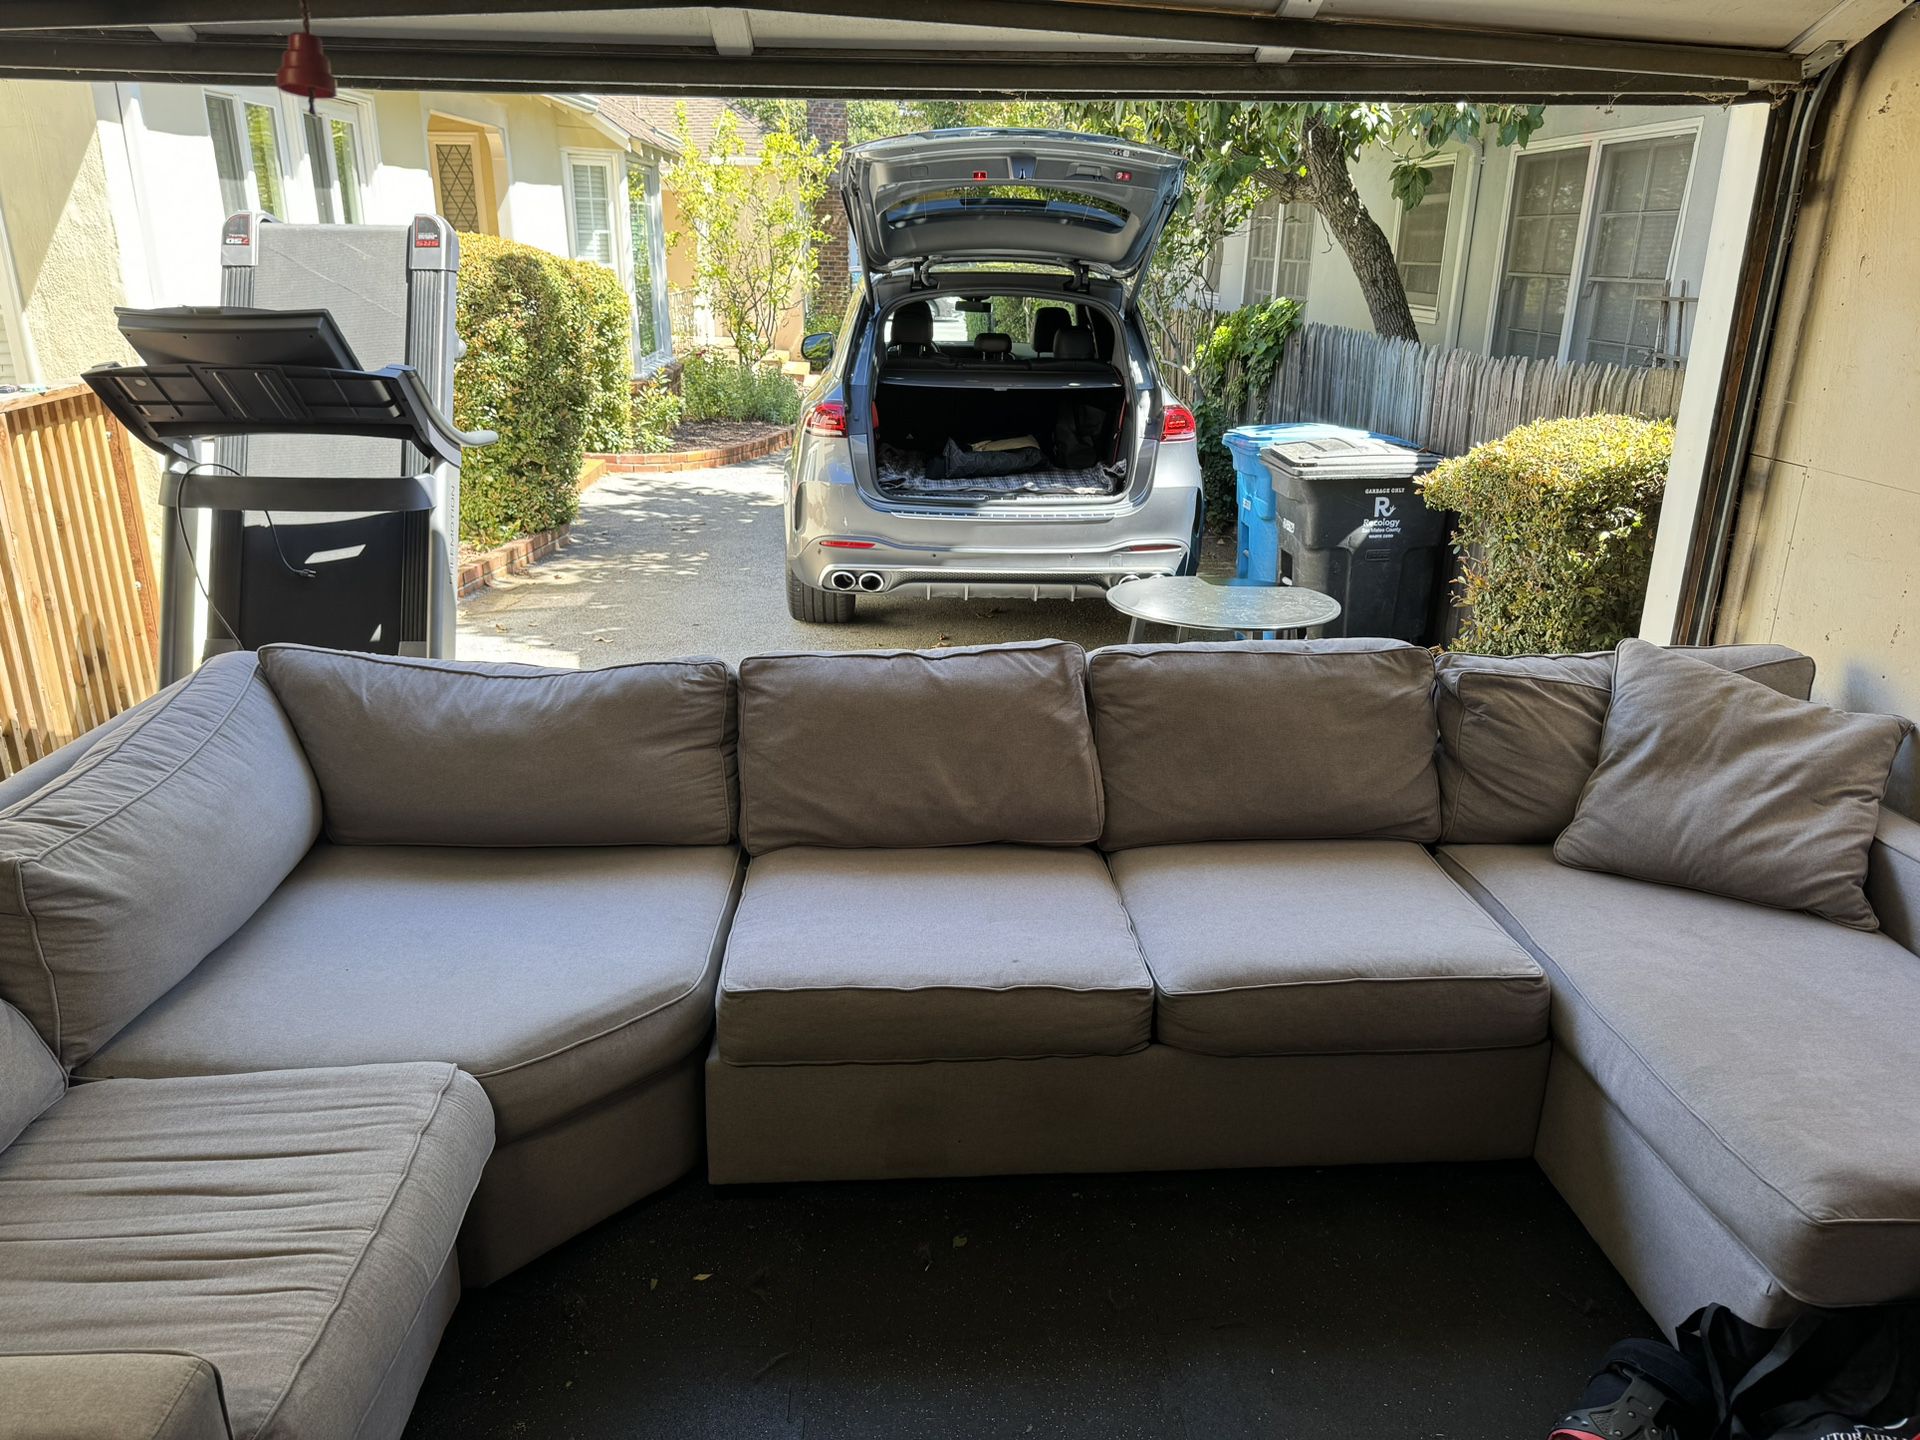 FREE Sectional Couch 